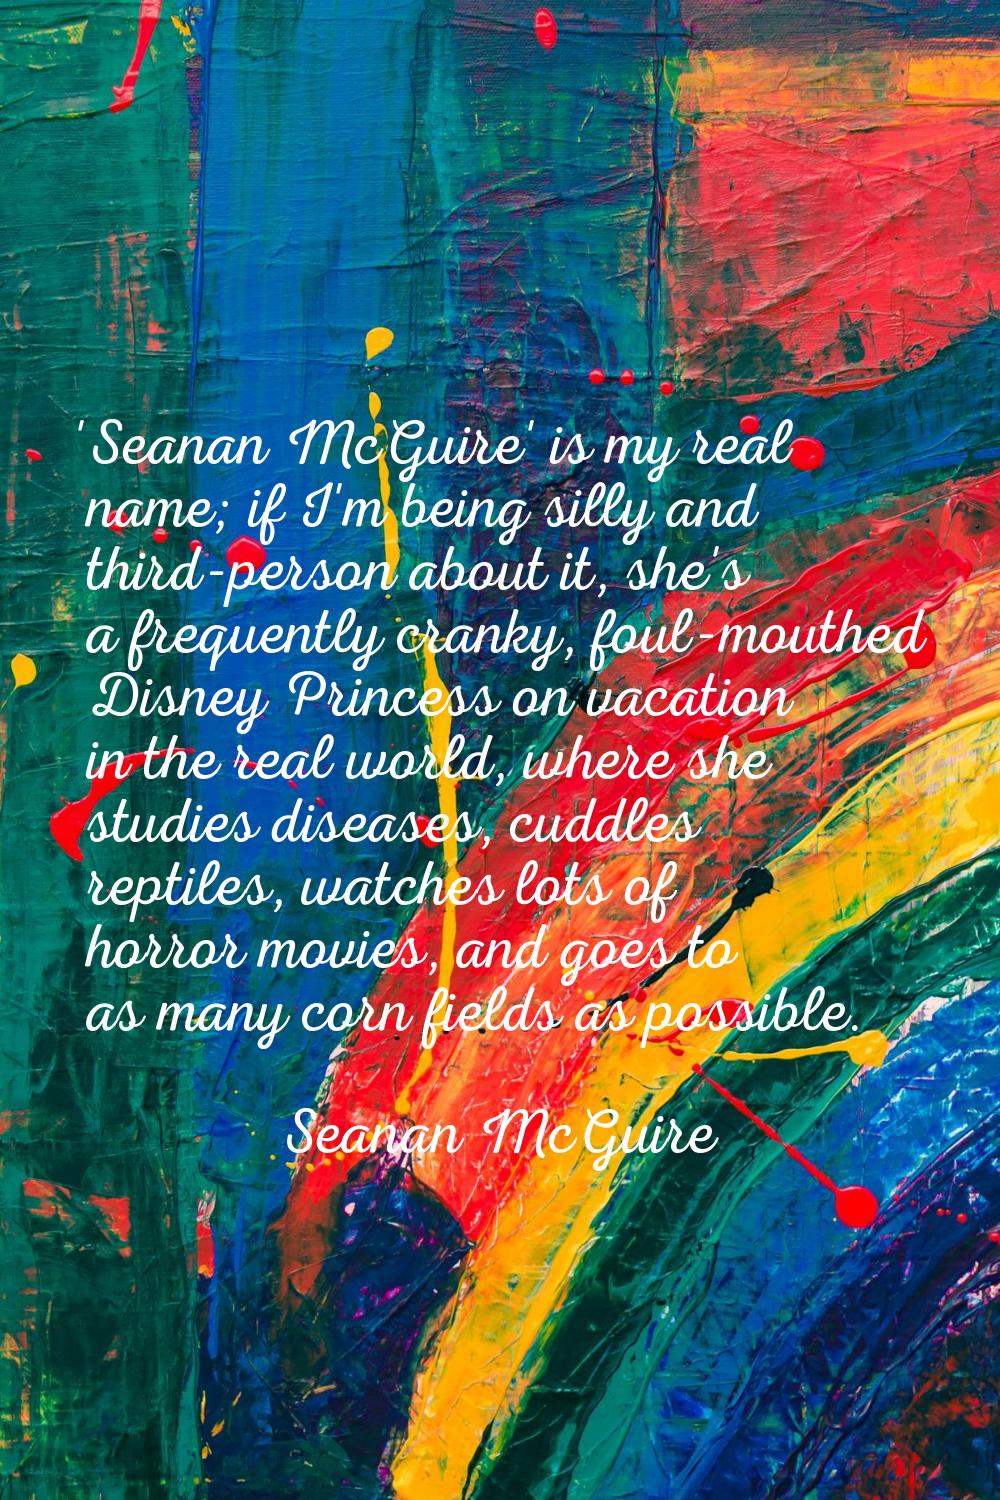 'Seanan McGuire' is my real name; if I'm being silly and third-person about it, she's a frequently 